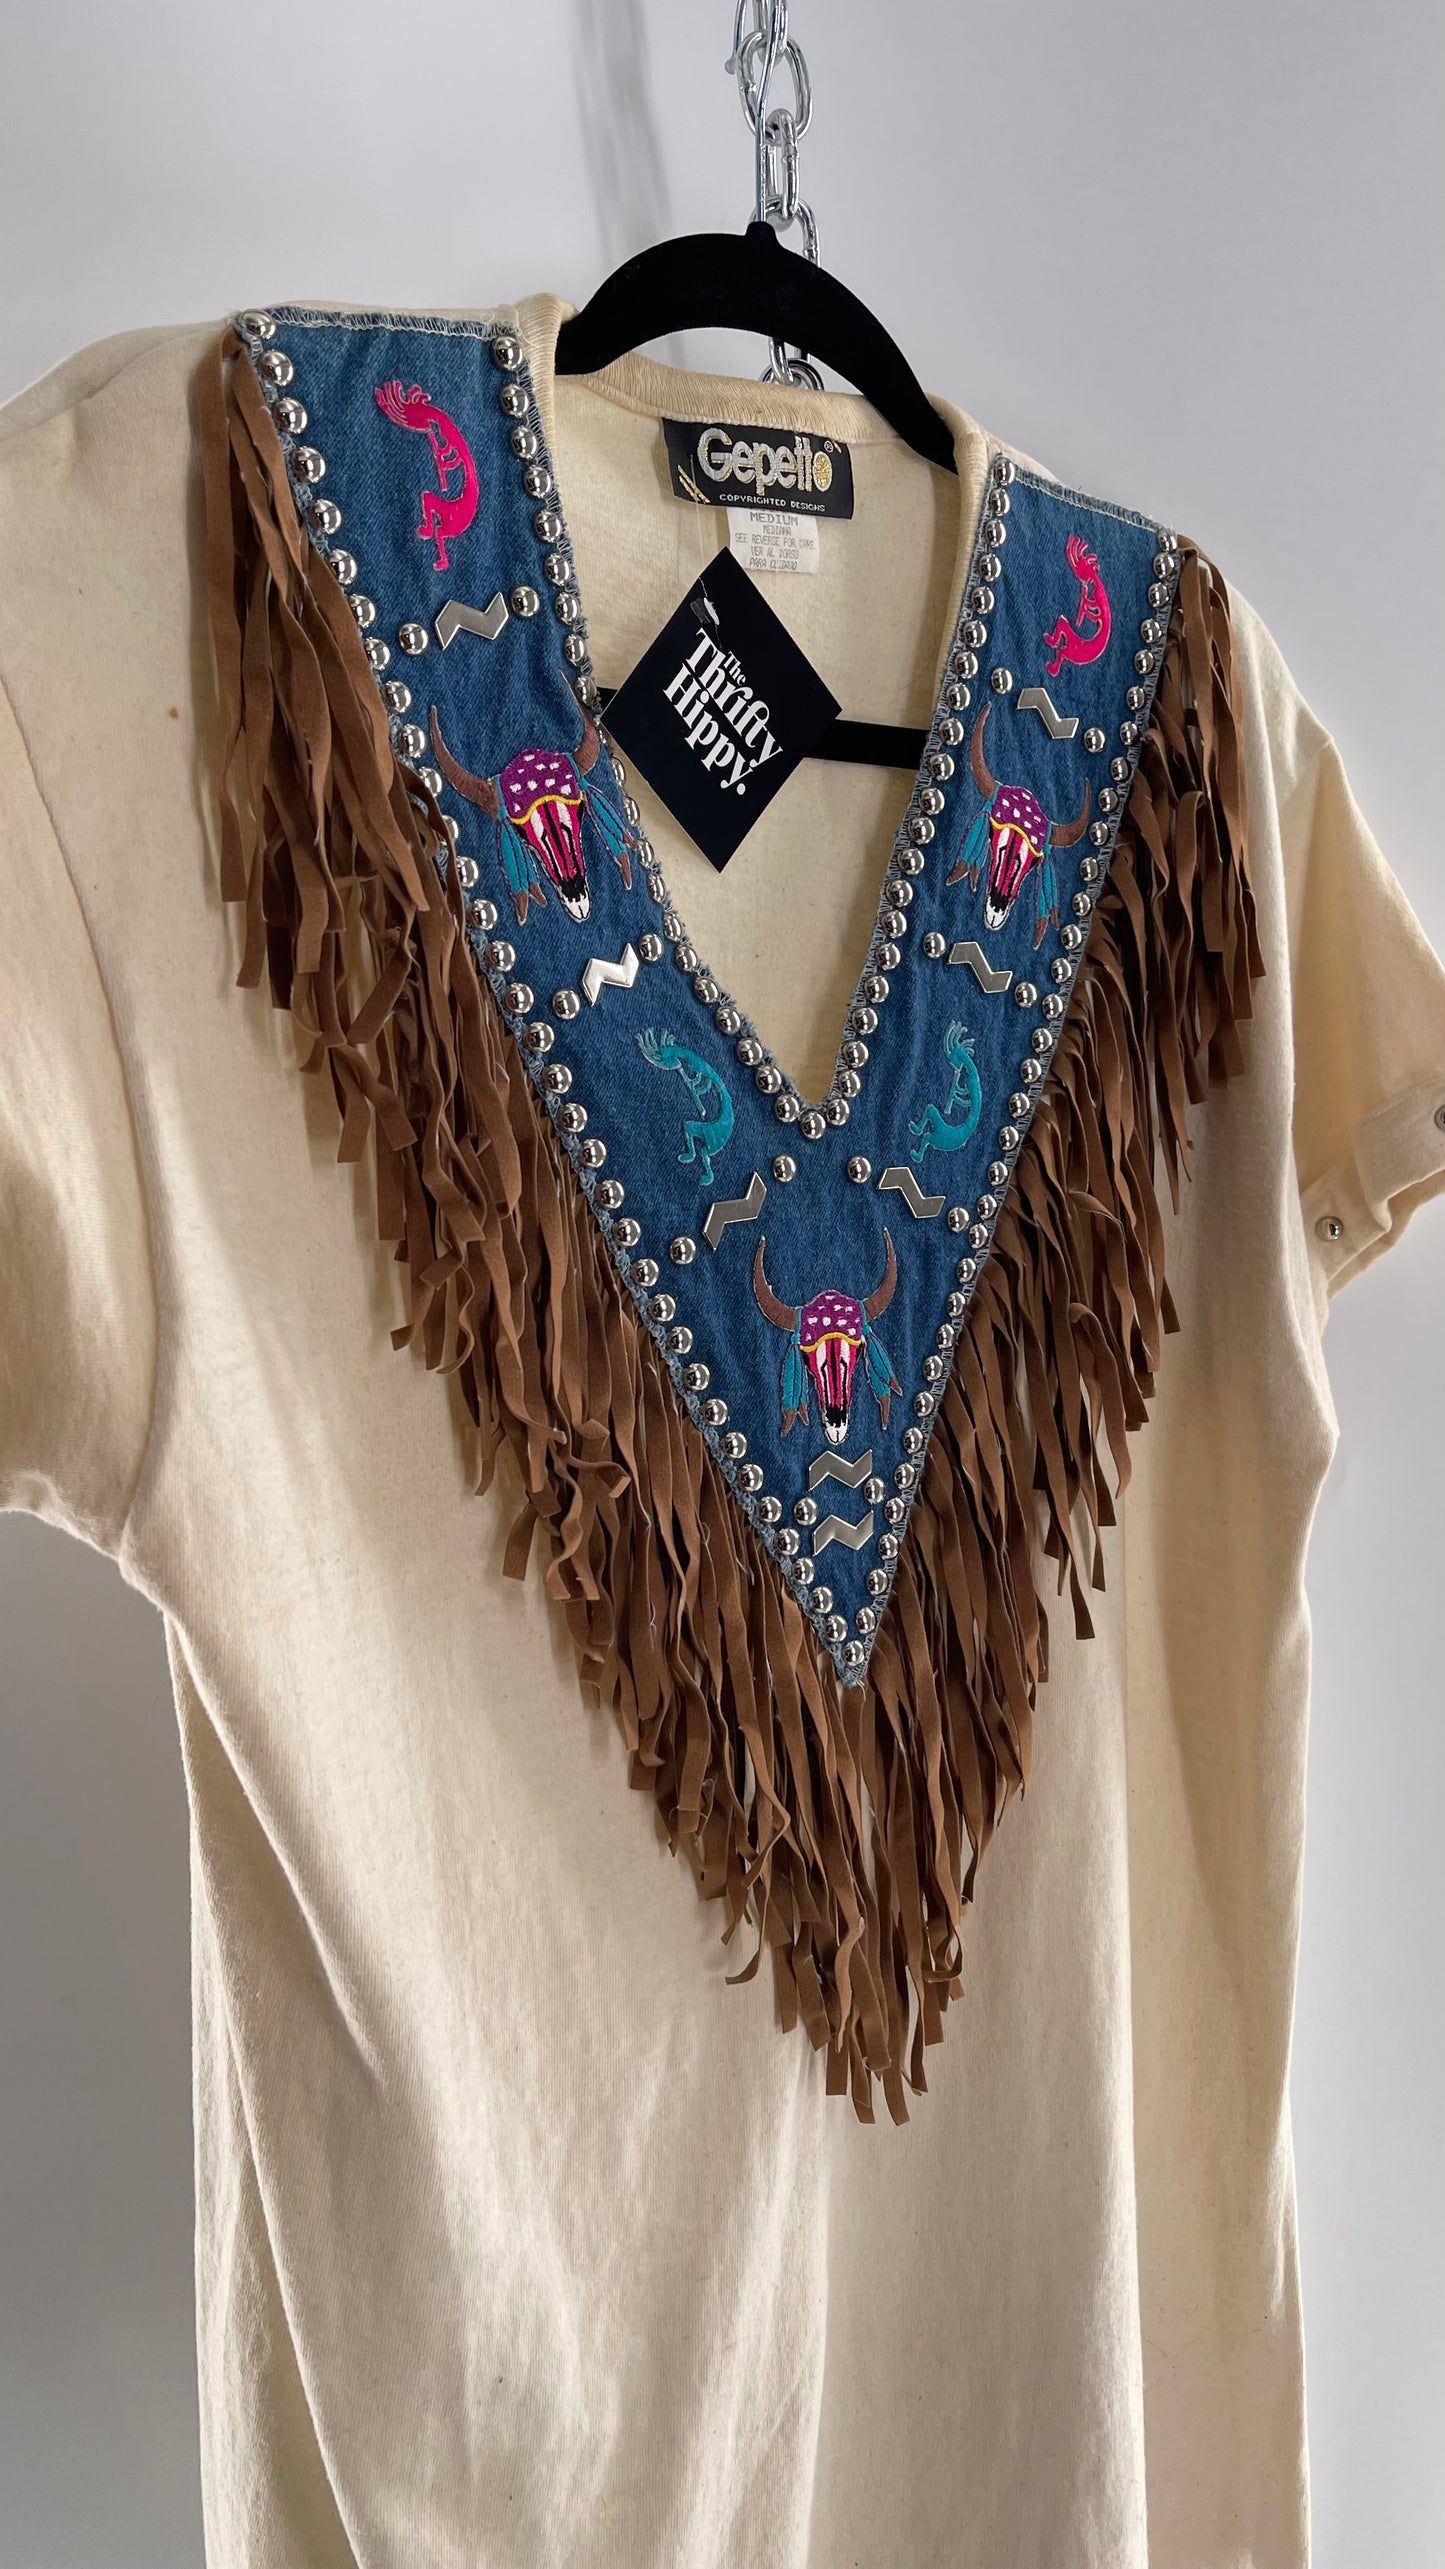 Vintage 1980s GEPETTO Off White Rodeo Western T Shirt with Denim Lined V Neck, Faux Leather Fringe Detail, Embroidery, and Heavy Duty Studs